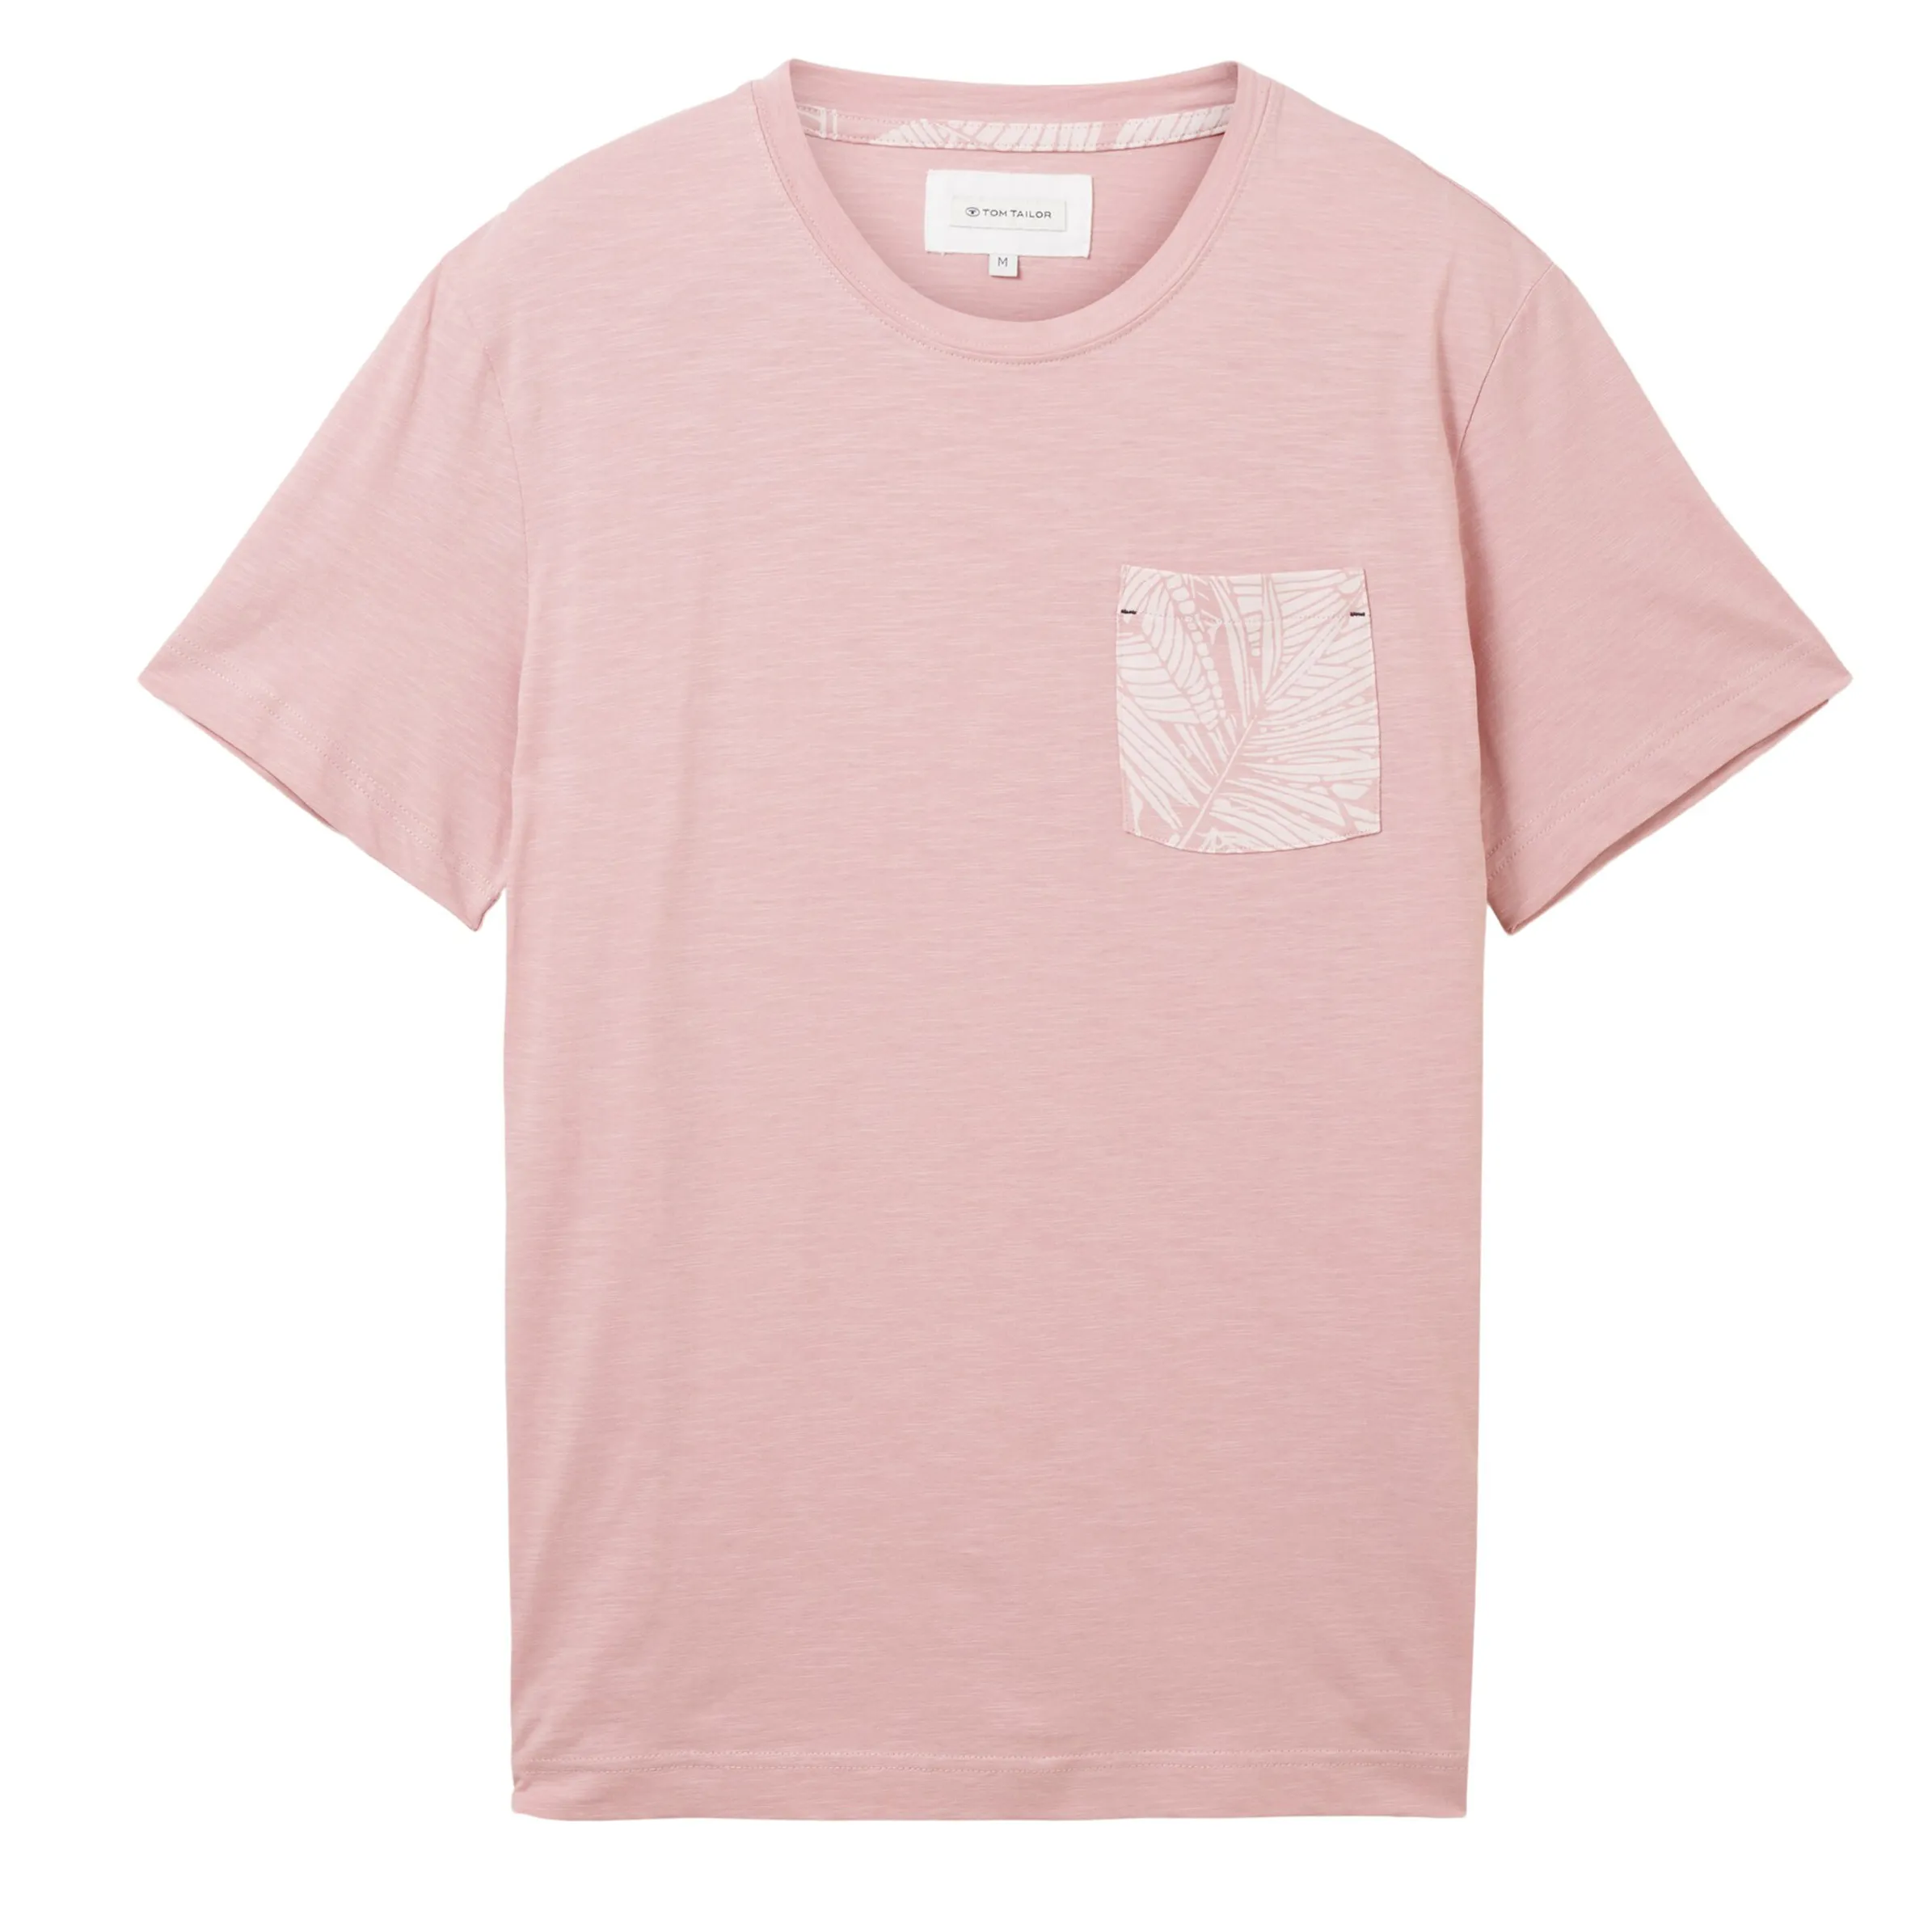 Tom Tailor 1036371 structured t-shirt with pocket Pink 880571 11055 1